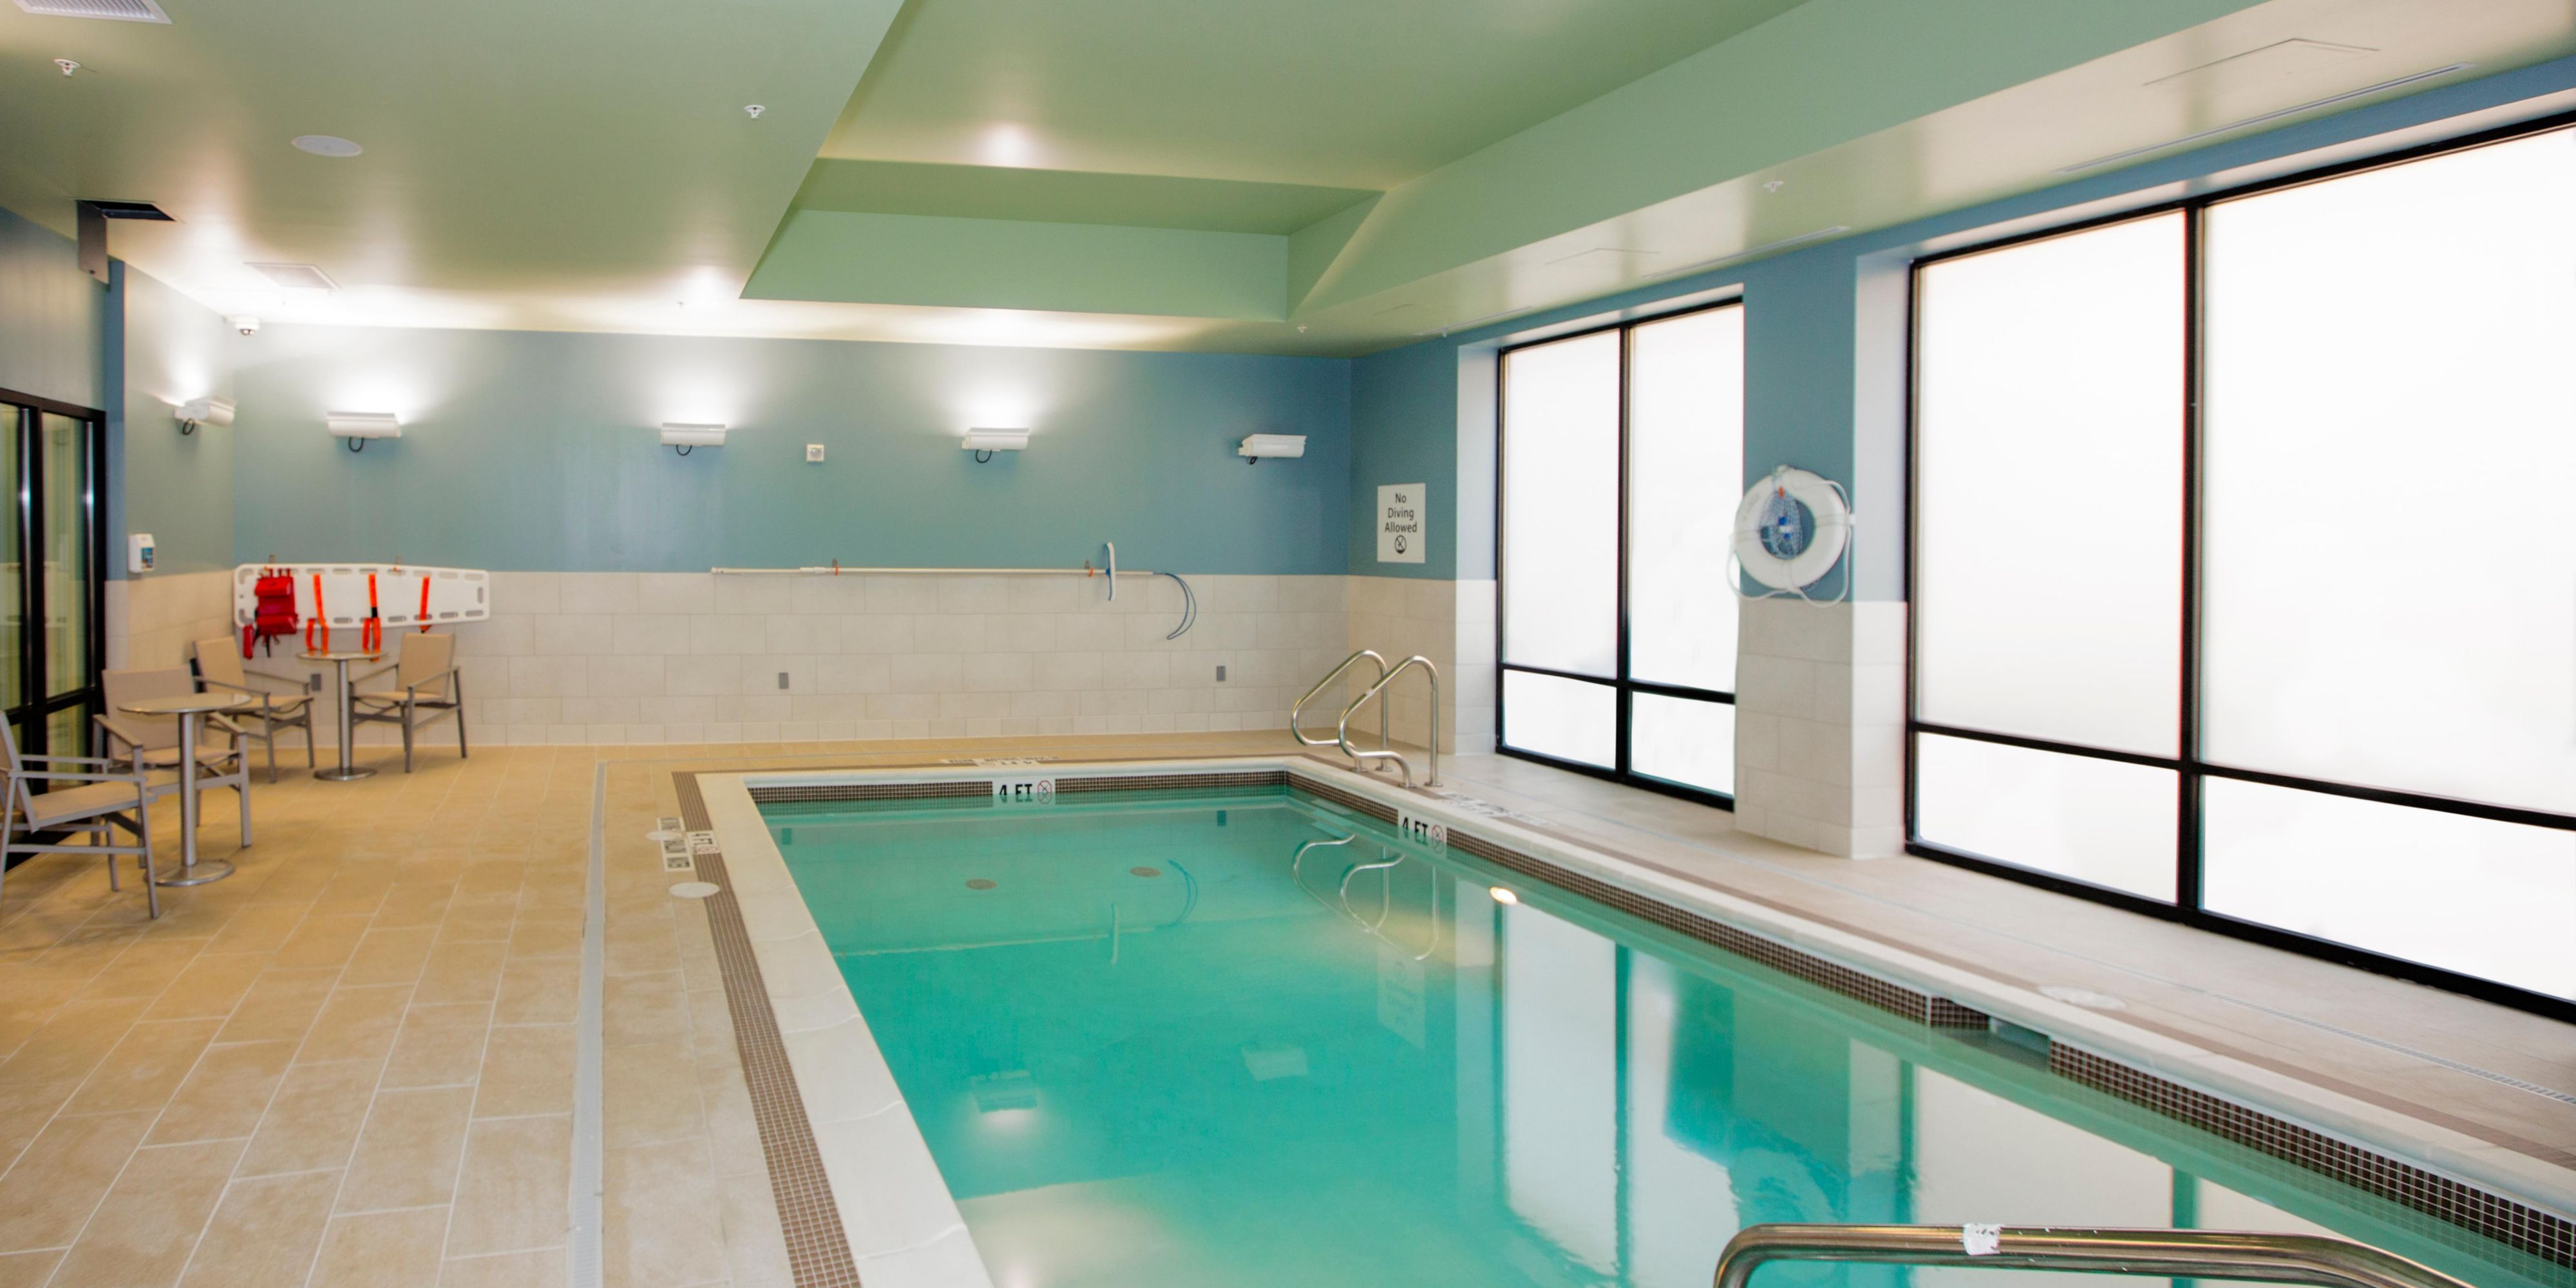 Bring the kids and pack your bathing suits to enjoy our heated indoor pool.  